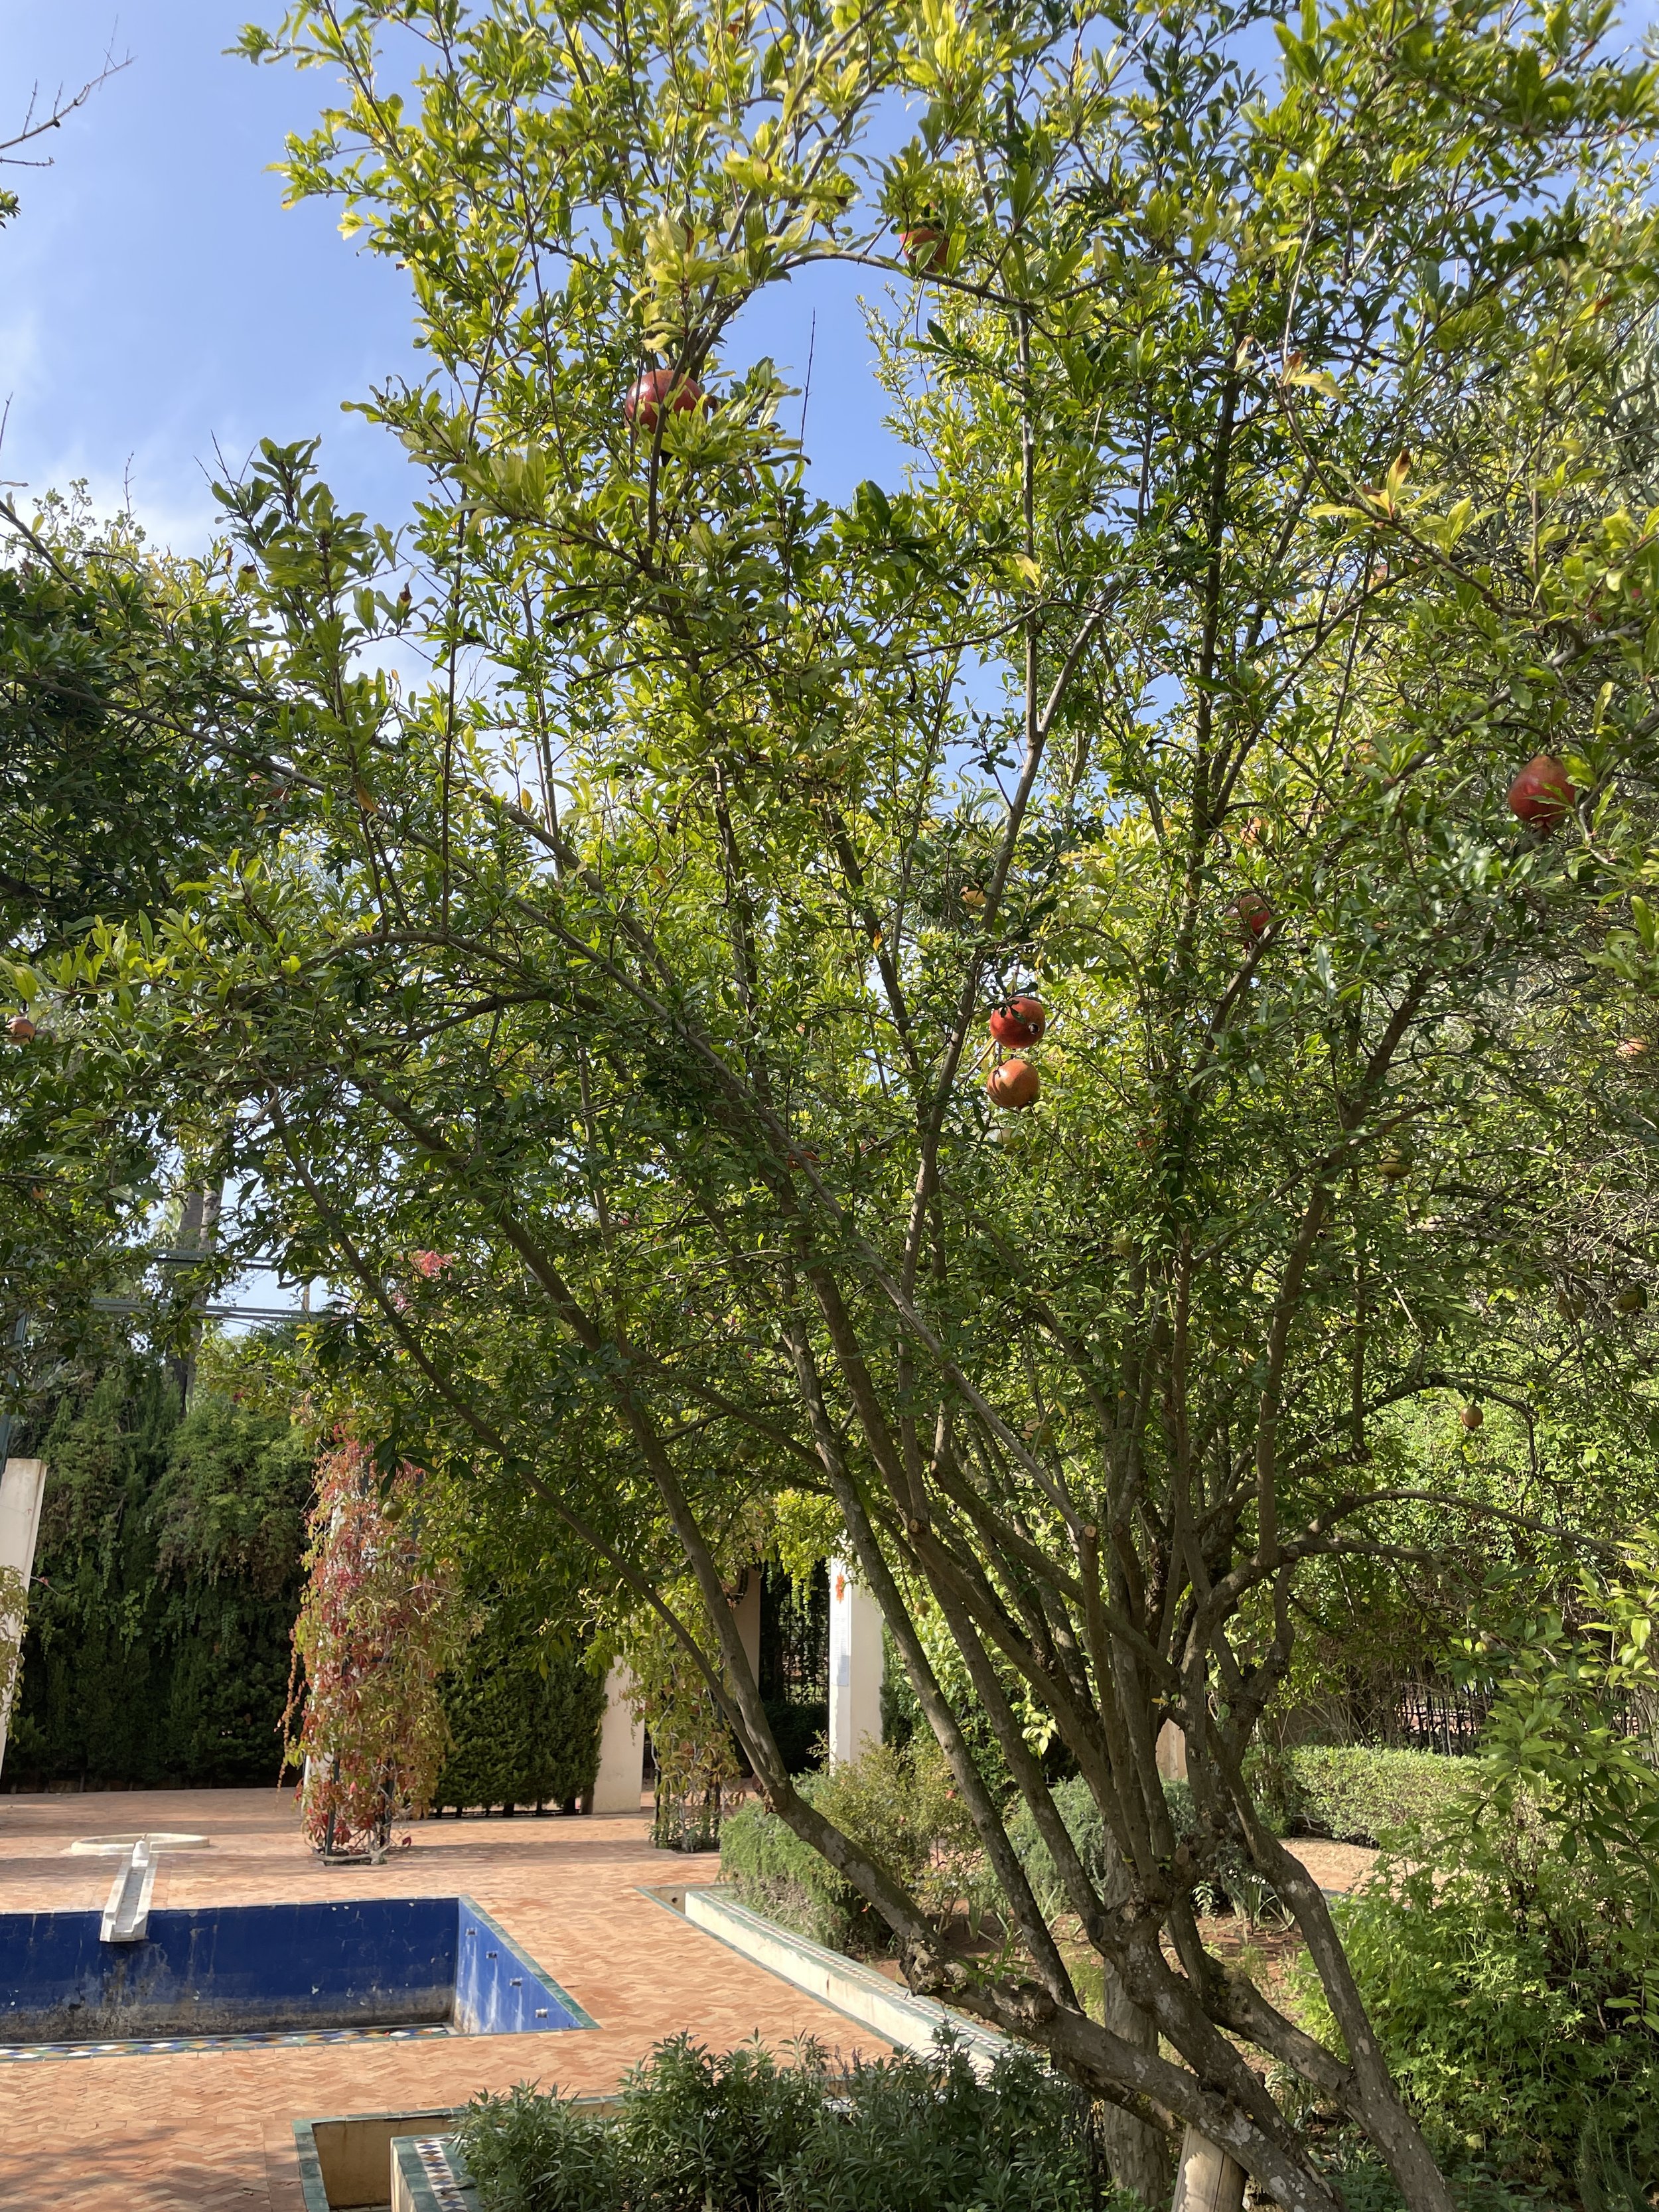  Pomegranates grow in the Jardins Botaniques. I had to use all of my self-control not to pluck one and eat it right there!  Photo Credit: Marley Craine, 2023 